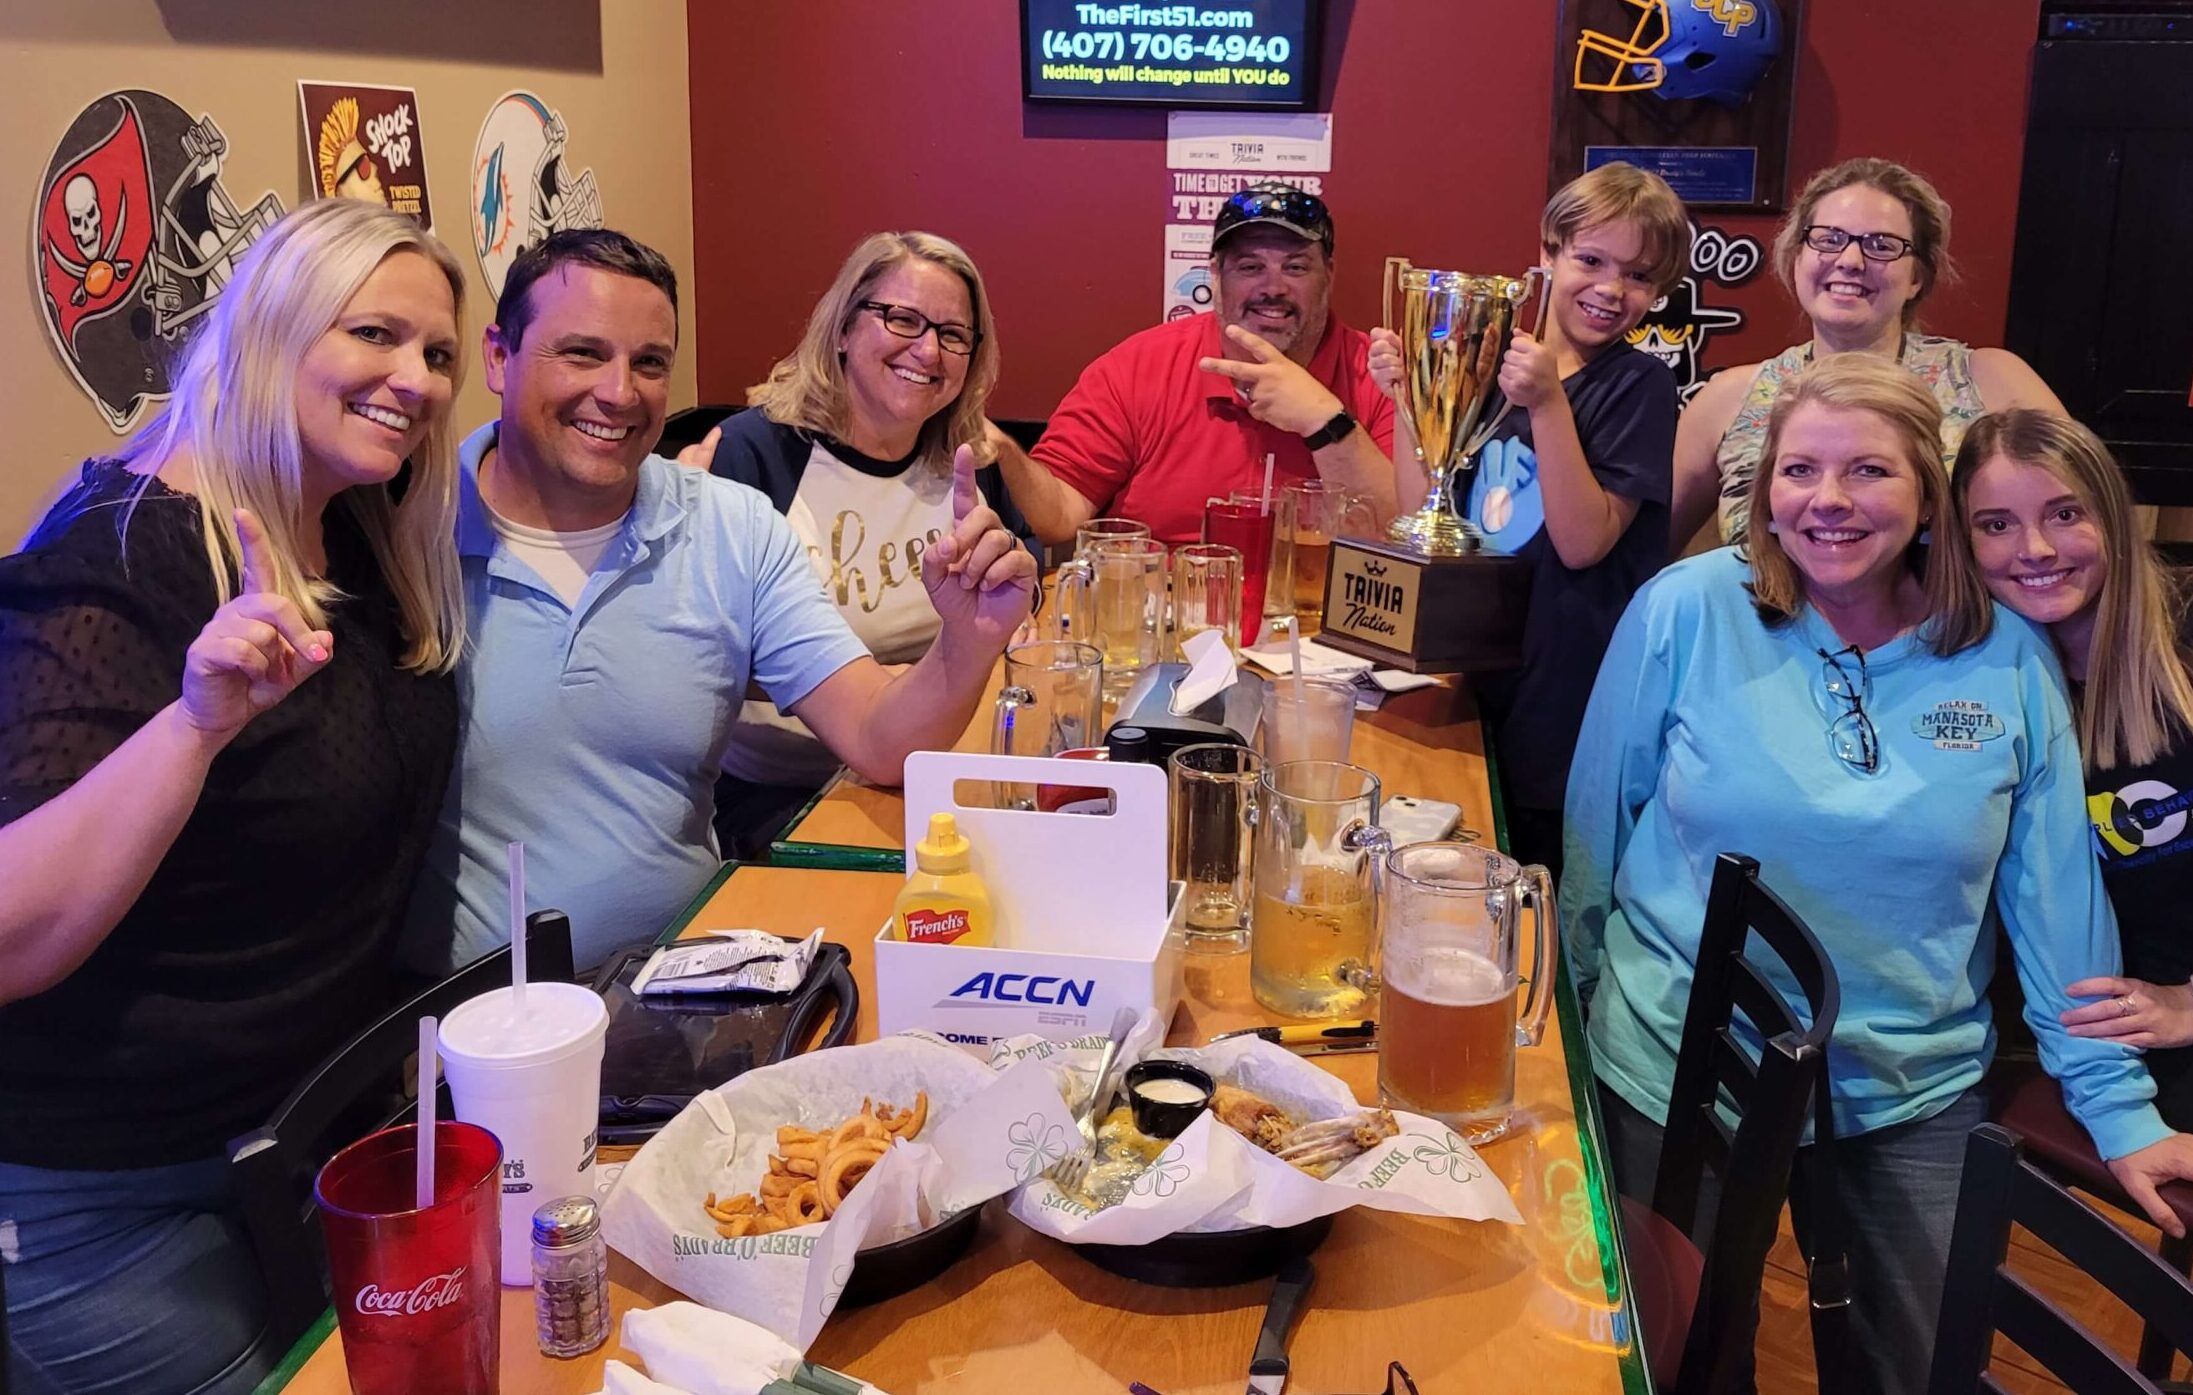 Beef O Brady's Oviedo FL 32765 trivia night: group of adults at a long table celebrating with beers and food as well as a child holding up a trophy